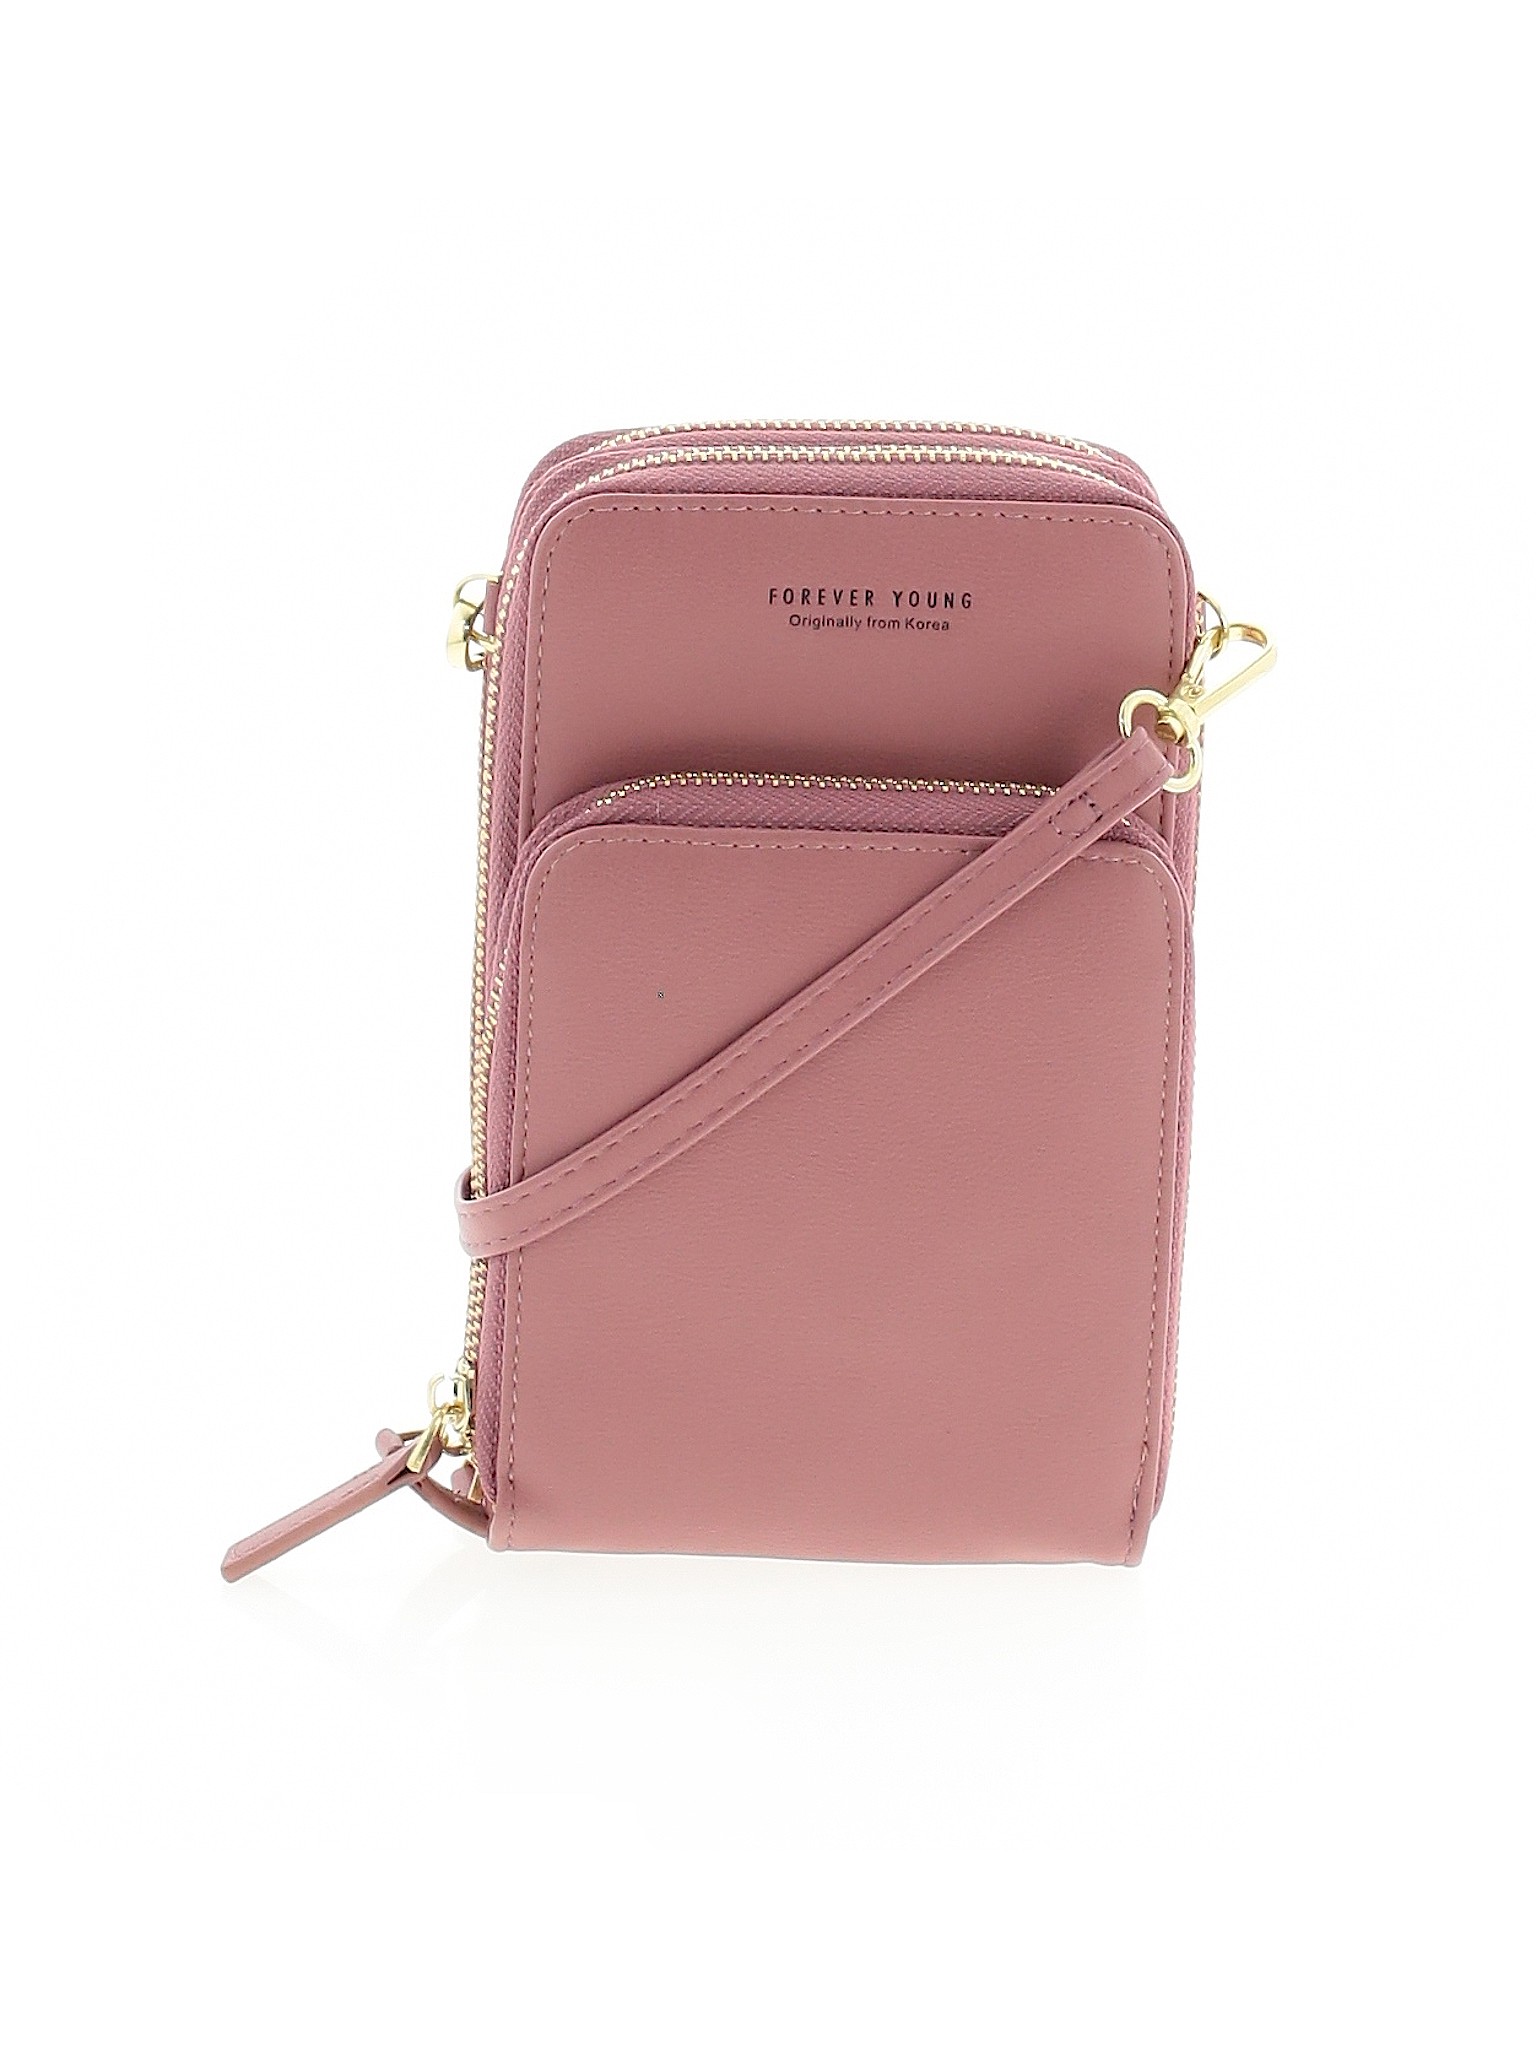 Forever Young 100% Leather Solid Pink Leather Crossbody Bag One Size - 52% off | thredUP